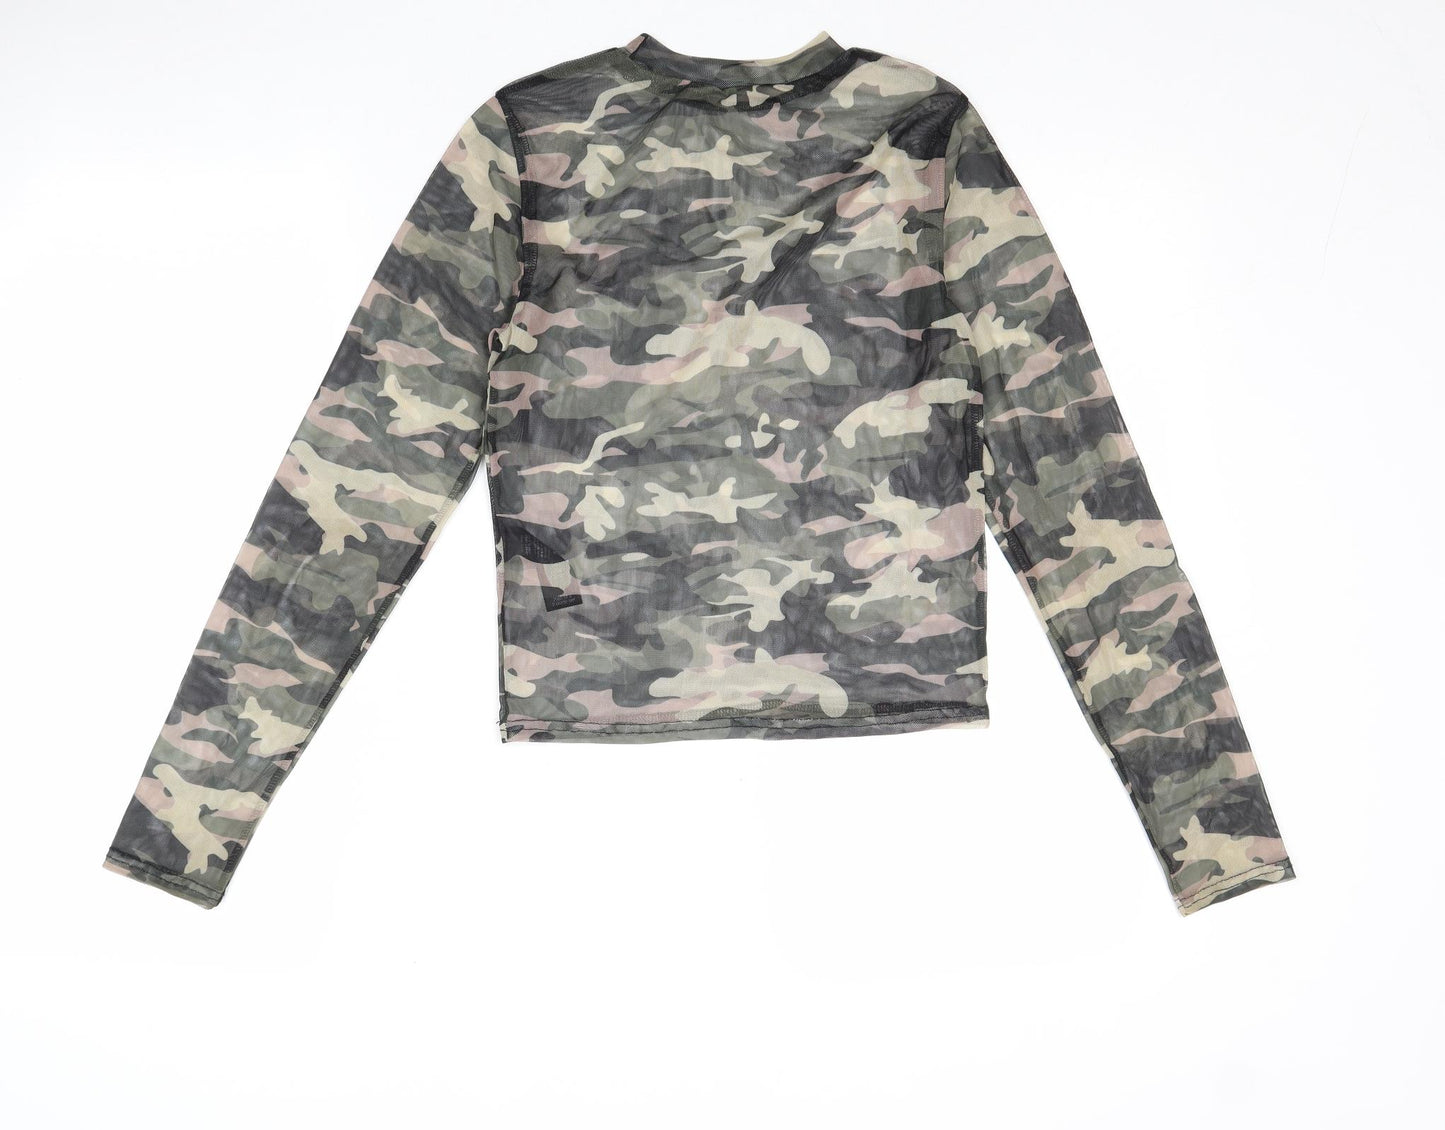 M&Co Girls Multicoloured Camouflage Polyester Pullover T-Shirt Size 12 Years Crew Neck Pullover